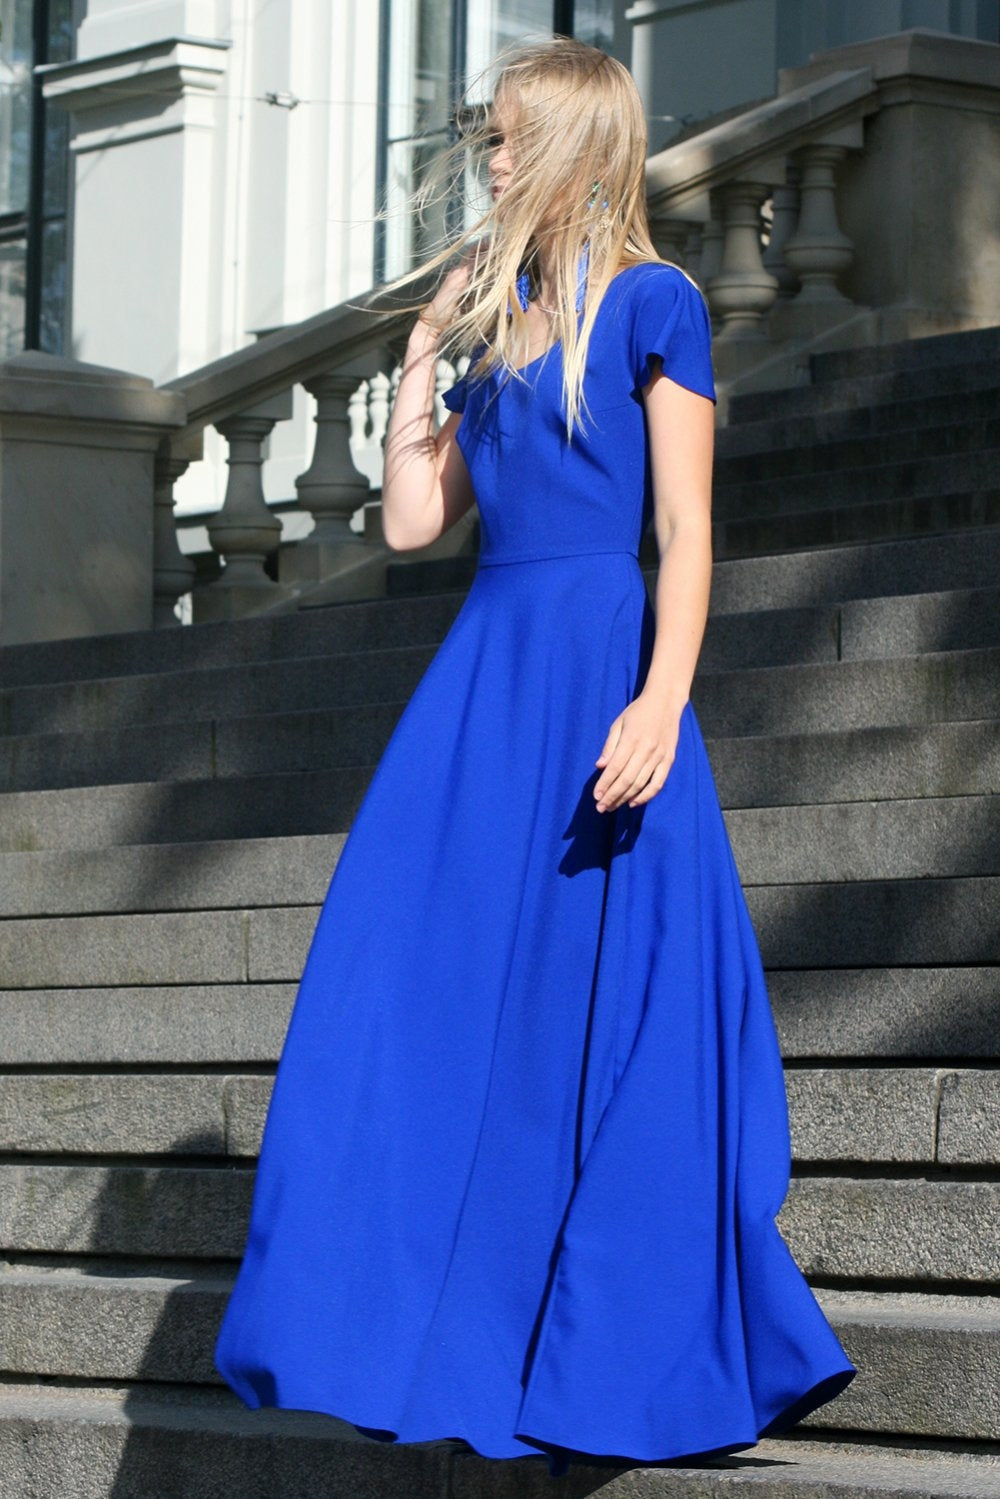 Maxi dress with cut out back